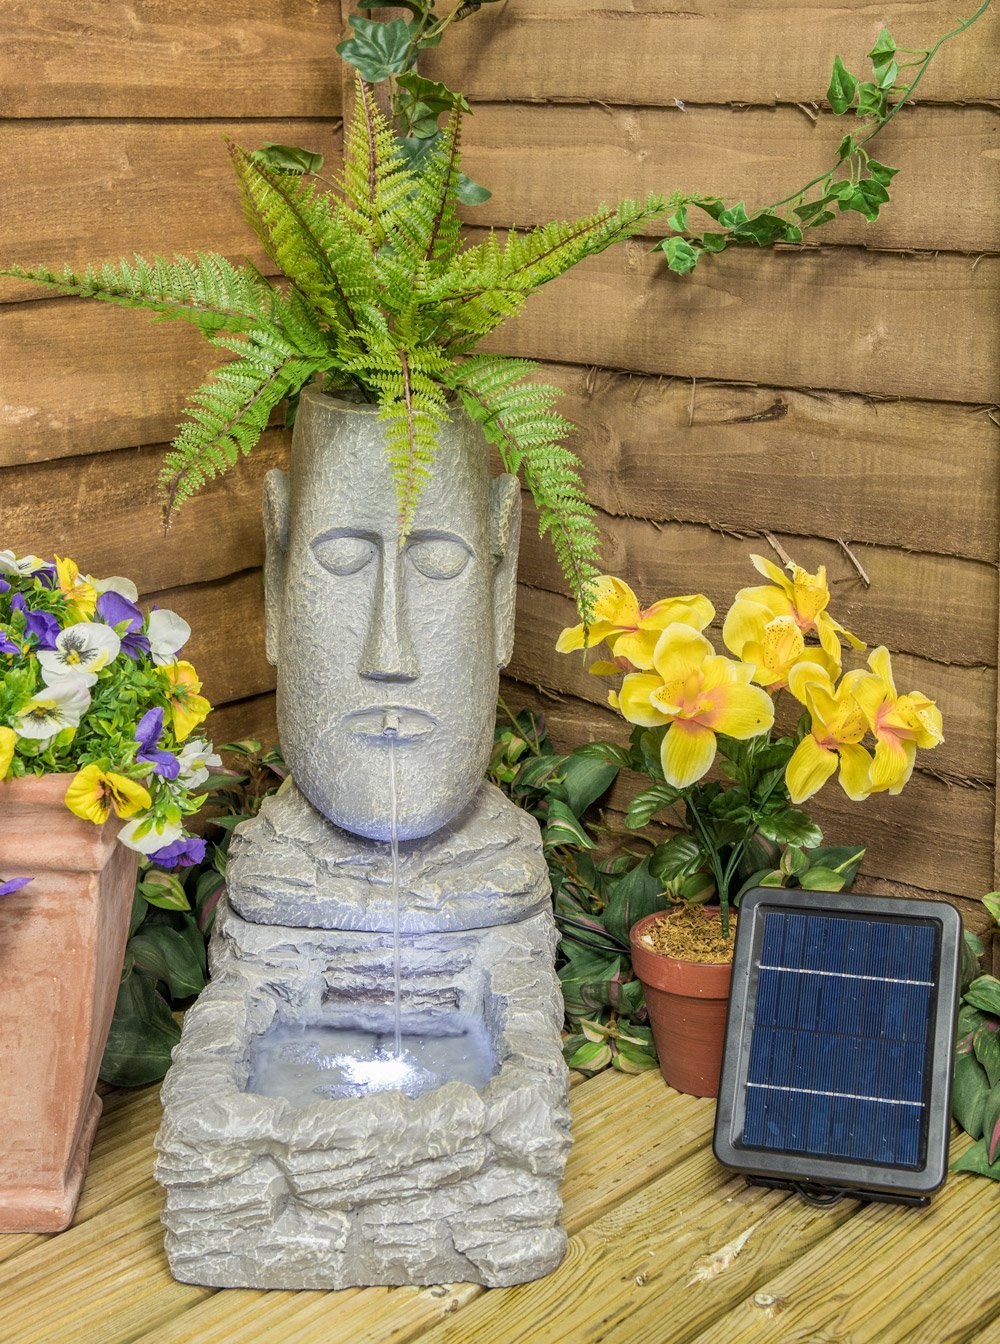 H50cm Easter Island Head Solar Water Feature & Planter with Lights by Solaray